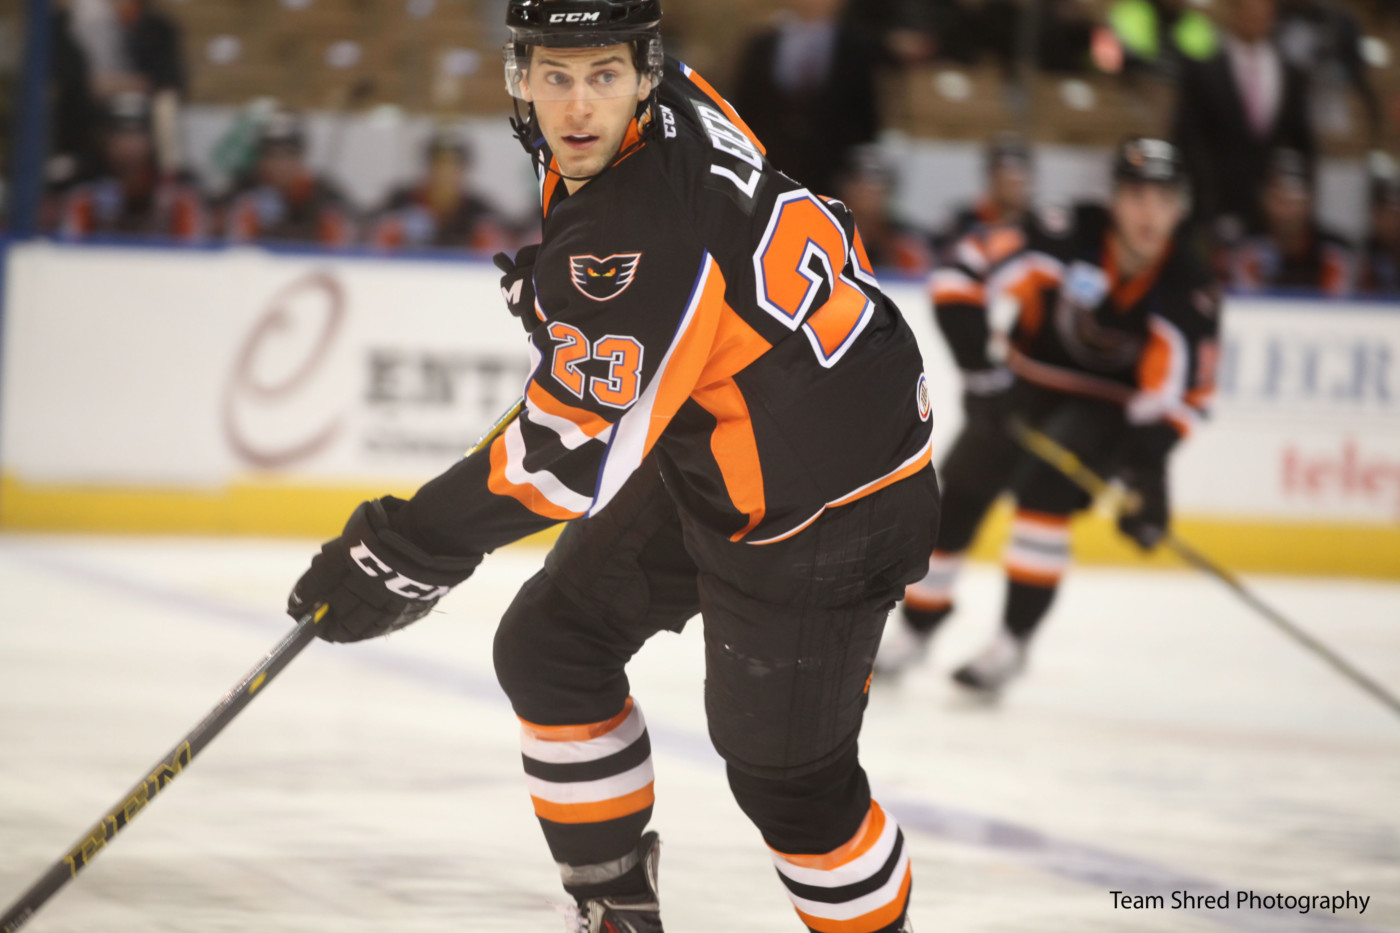 Sports Photography with the Lehigh Valley Phantoms